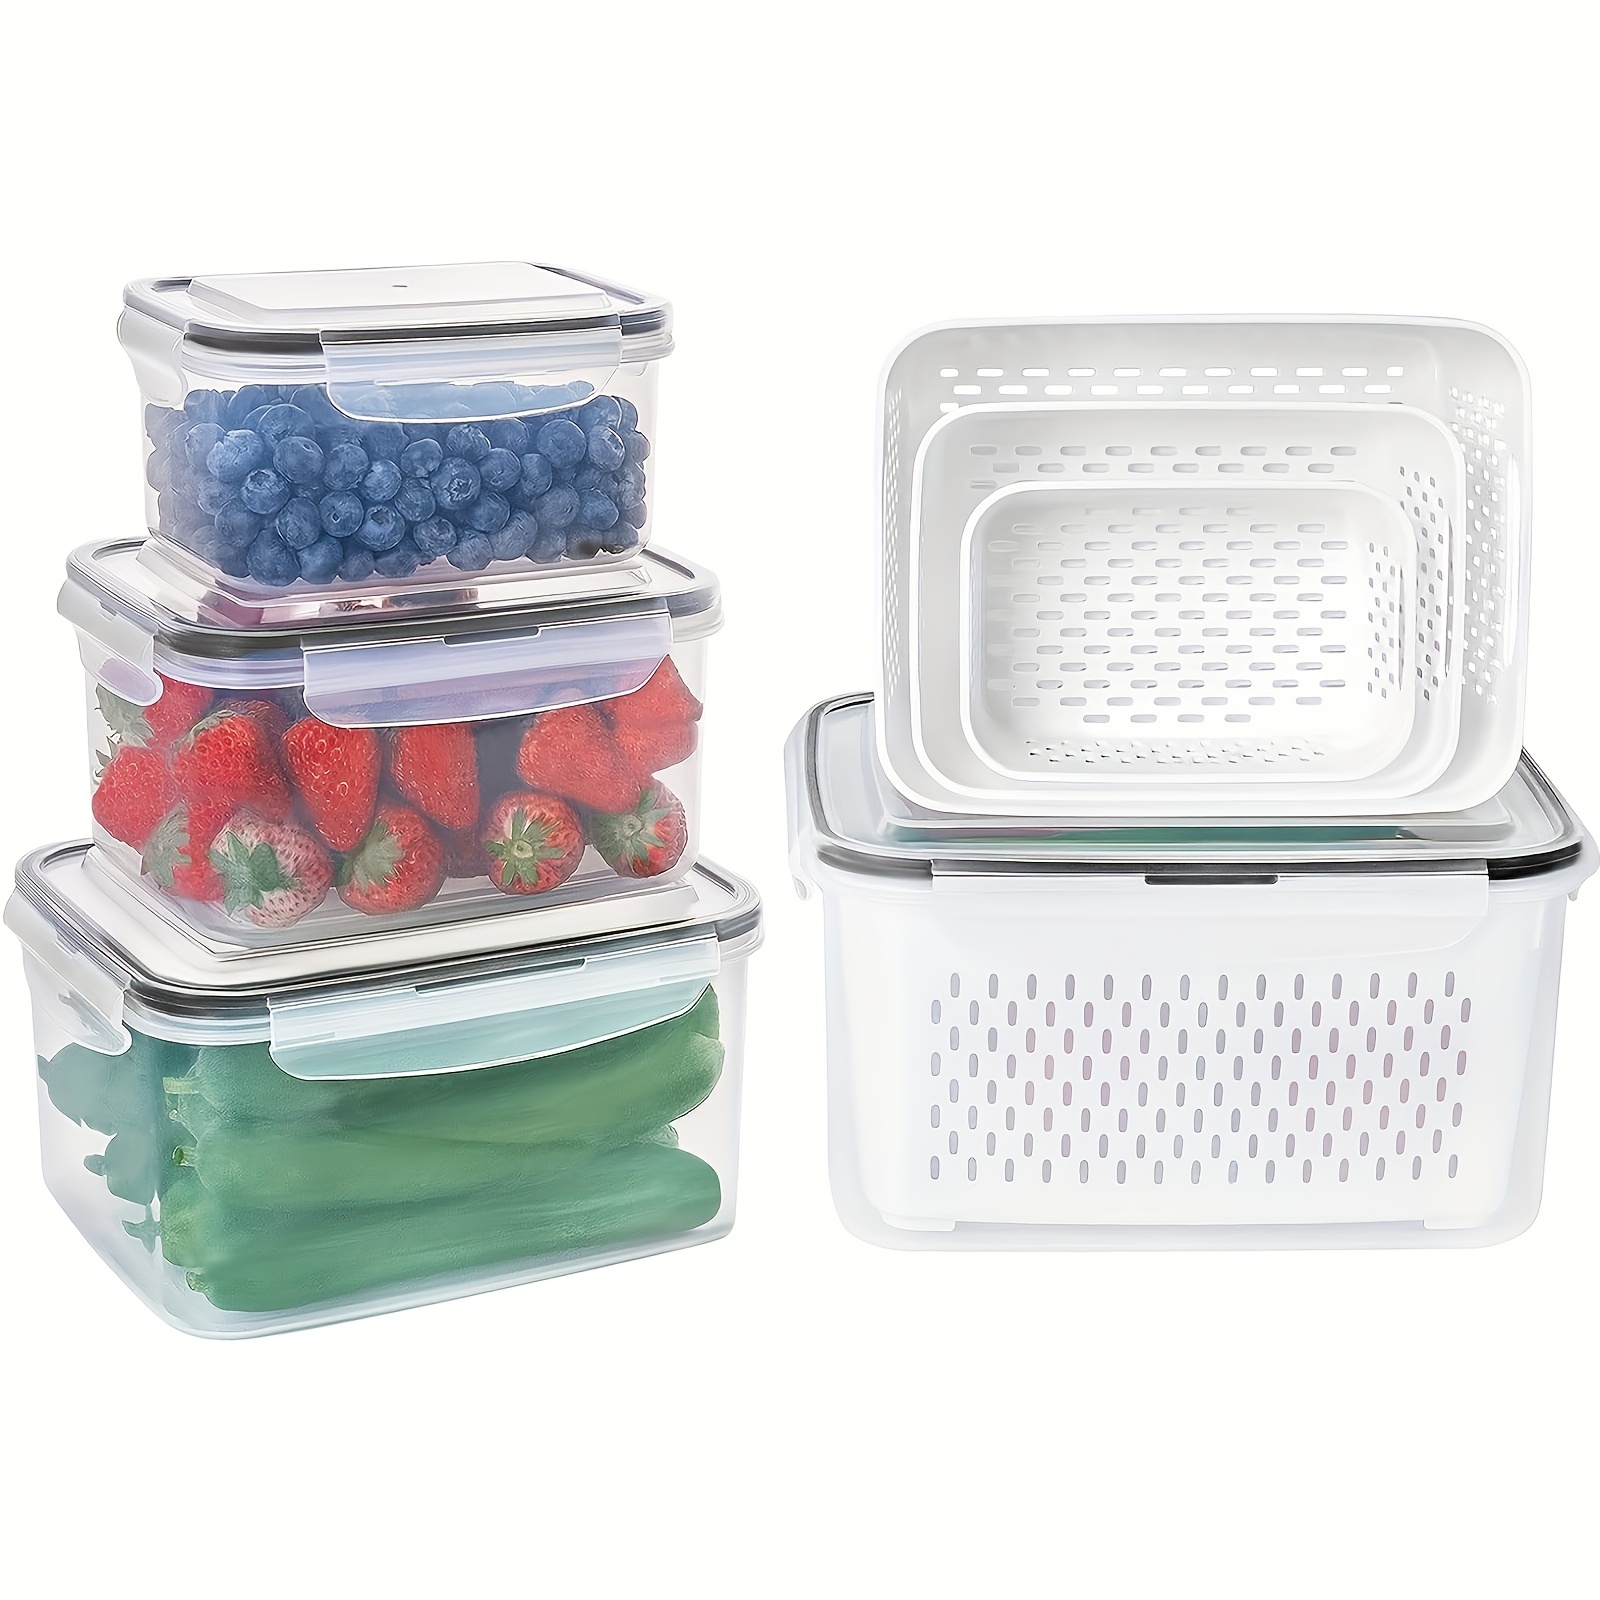 Pp Fruit Storage Organizer For Fridge With Detachable Colander And